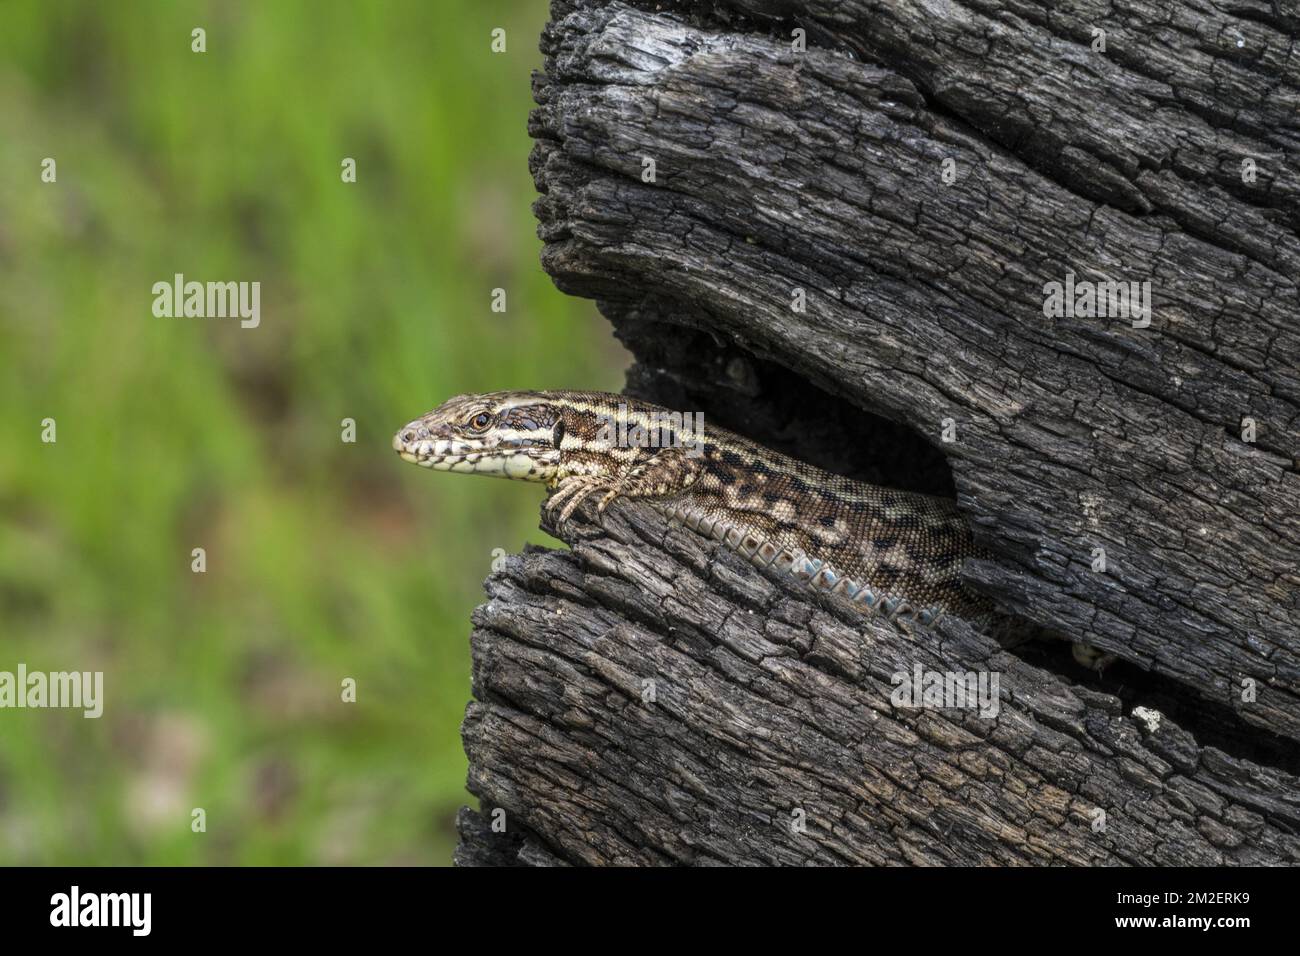 Common wall lizard (Podarcis muralis / Lacerta muralis) male emerging from gap in scorched tree trunk | Lézard des murailles (Podarcis muralis) 23/04/2018 Stock Photo